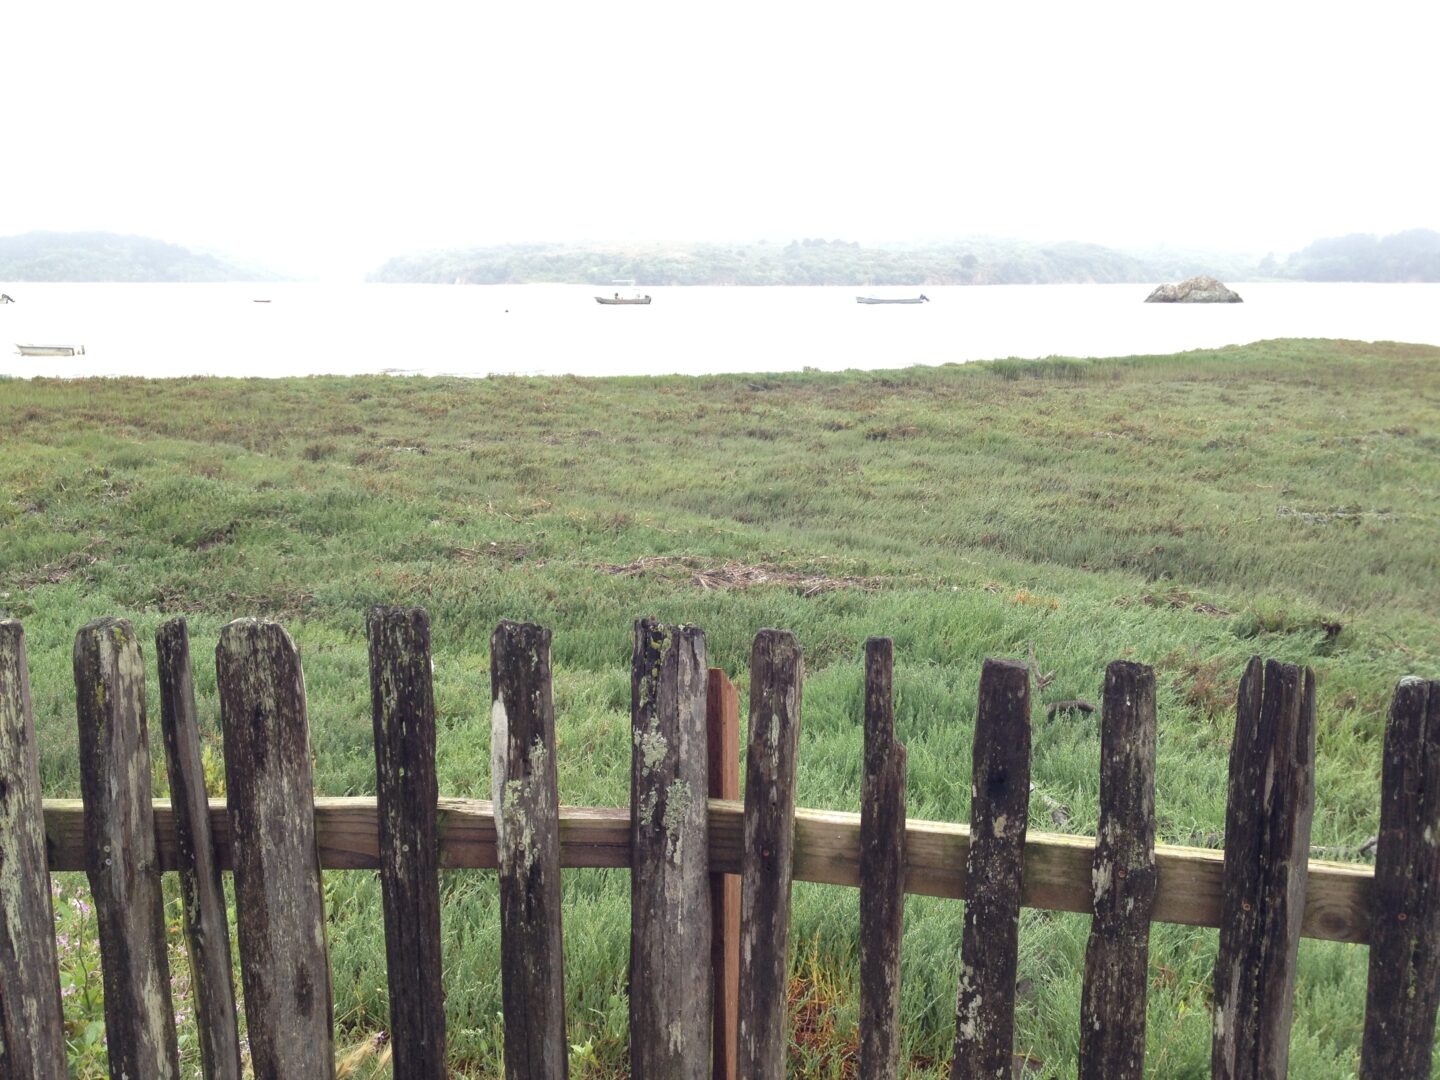 A wooden fence next to a body of water.